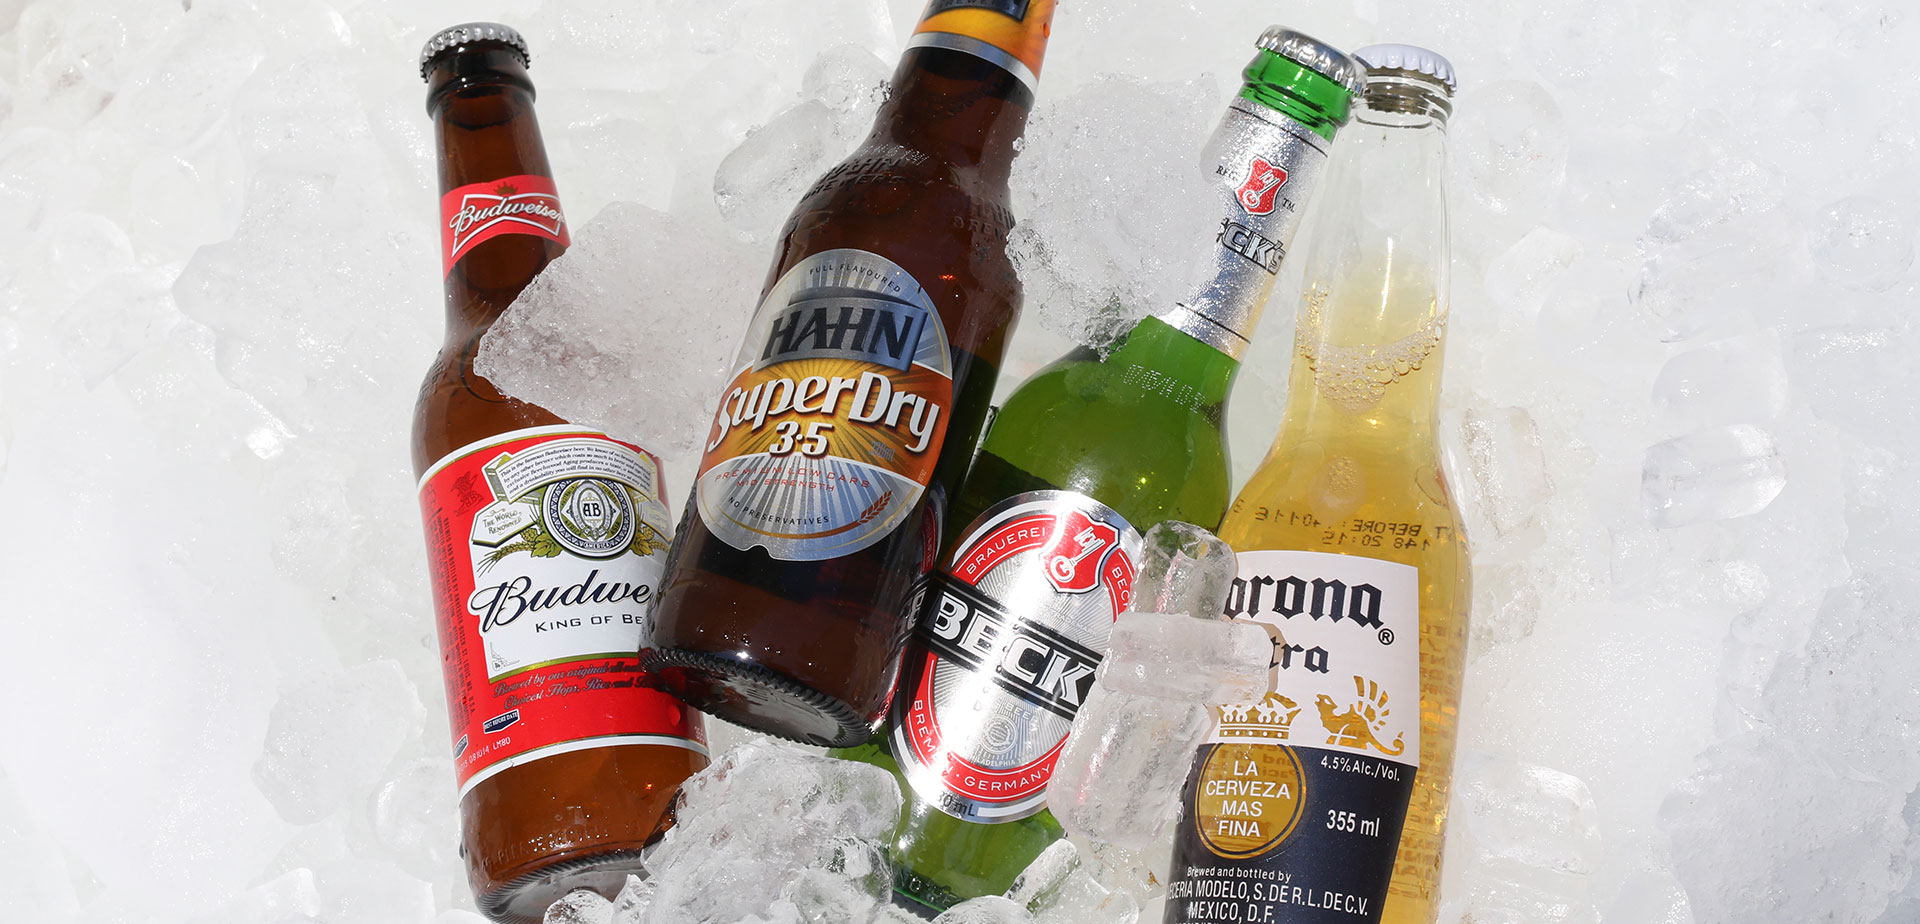 Picture: Beers in Ice